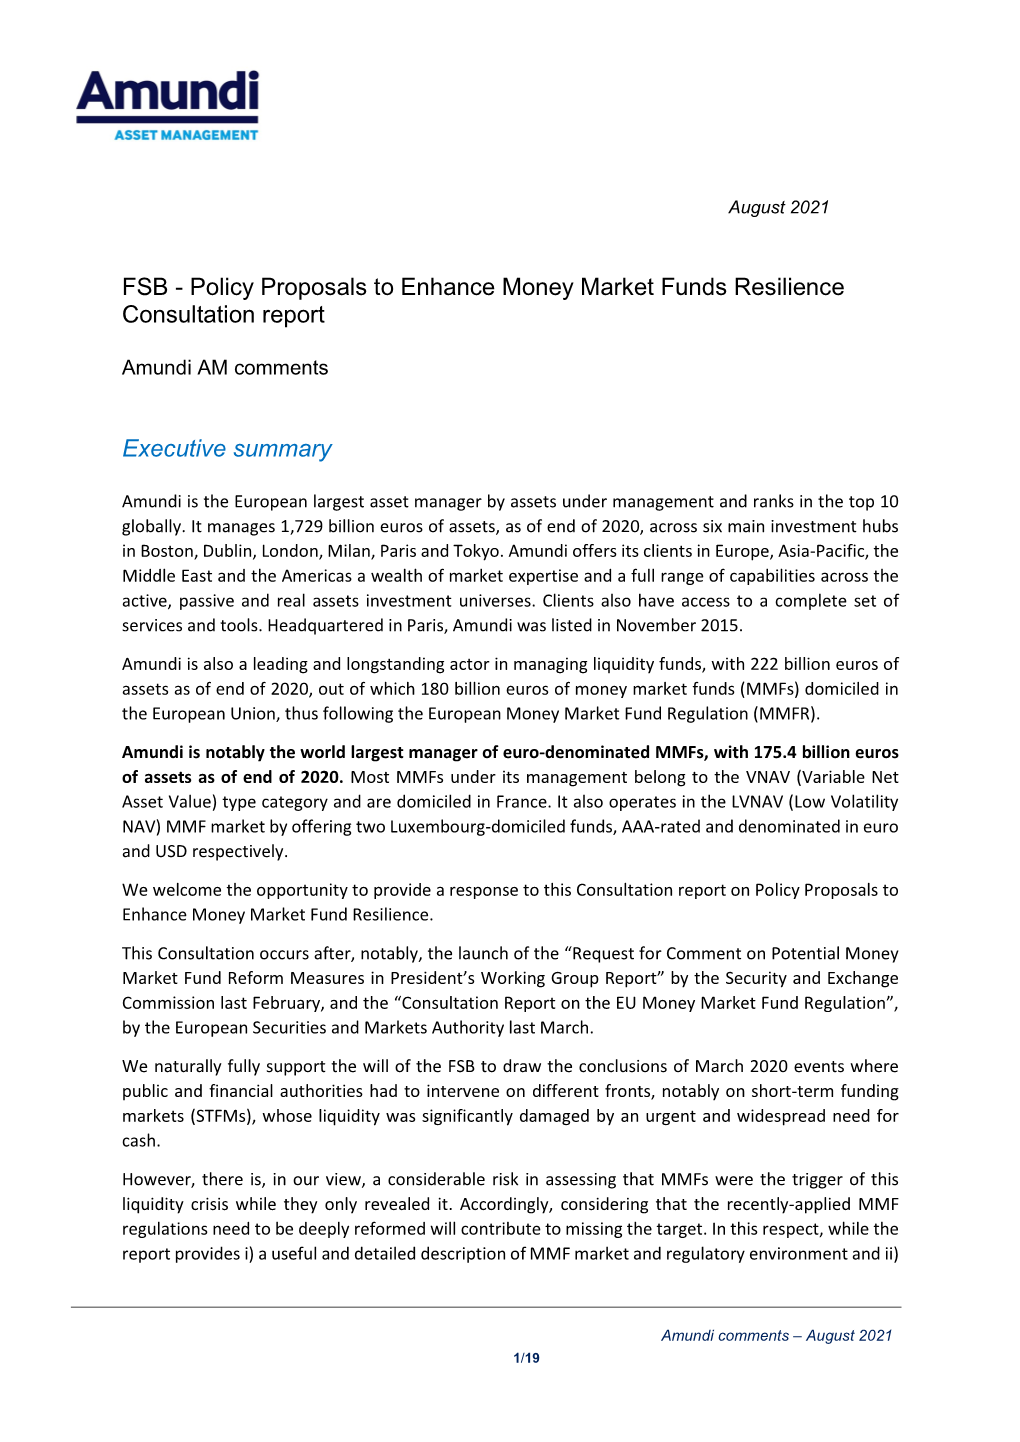 FSB - Policy Proposals to Enhance Money Market Funds Resilience Consultation Report